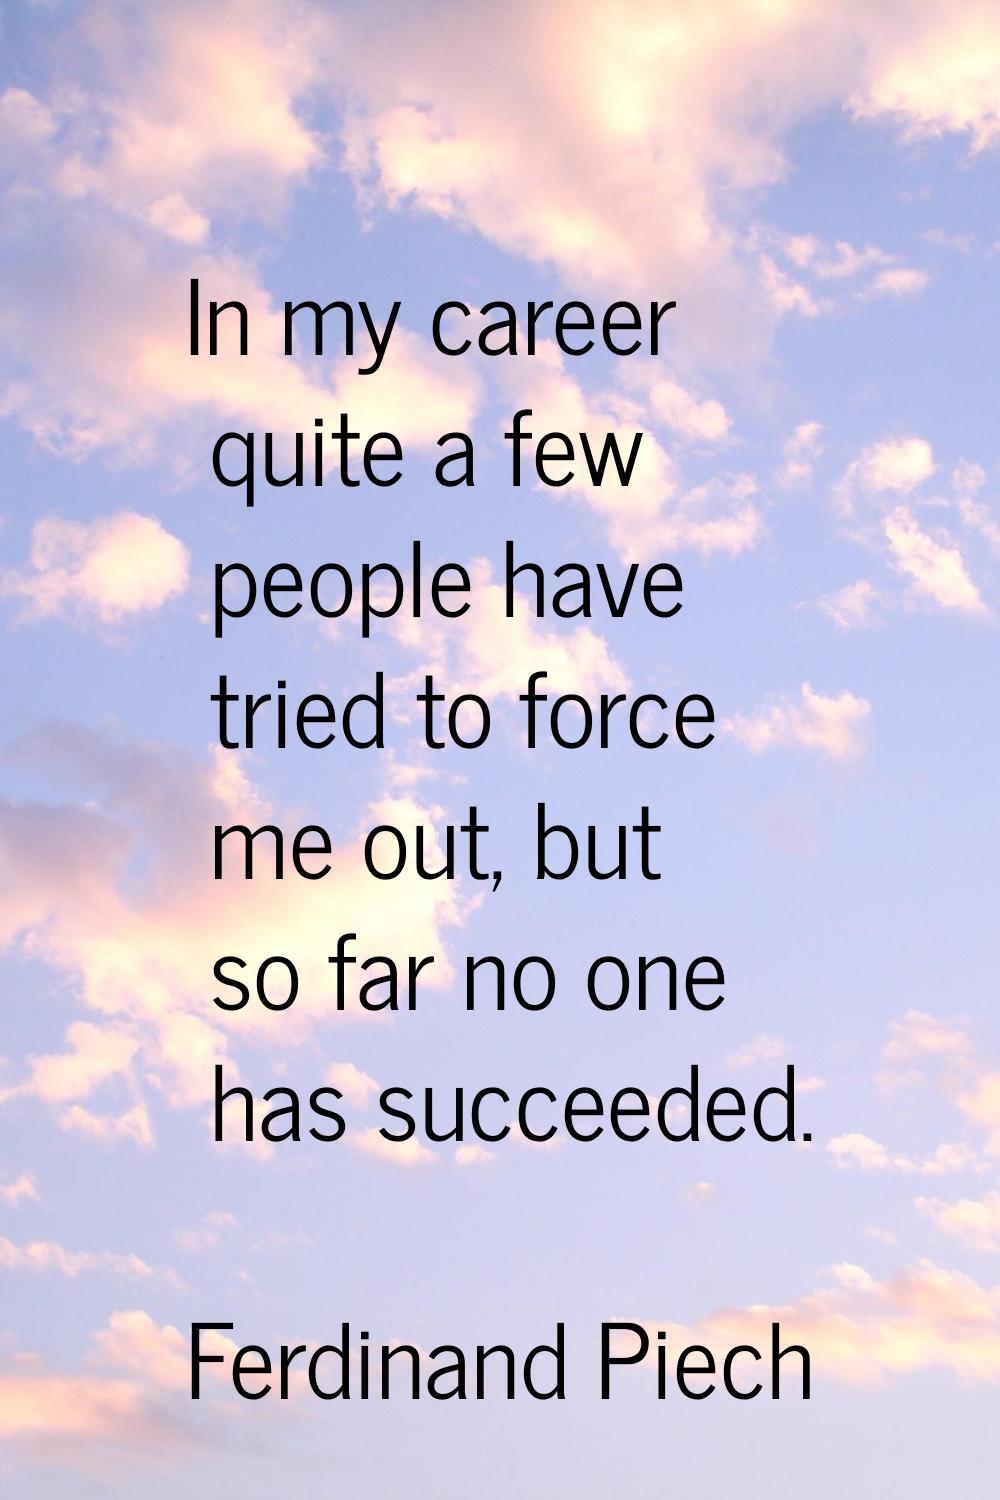 In my career quite a few people have tried to force me out, but so far no one has succeeded.